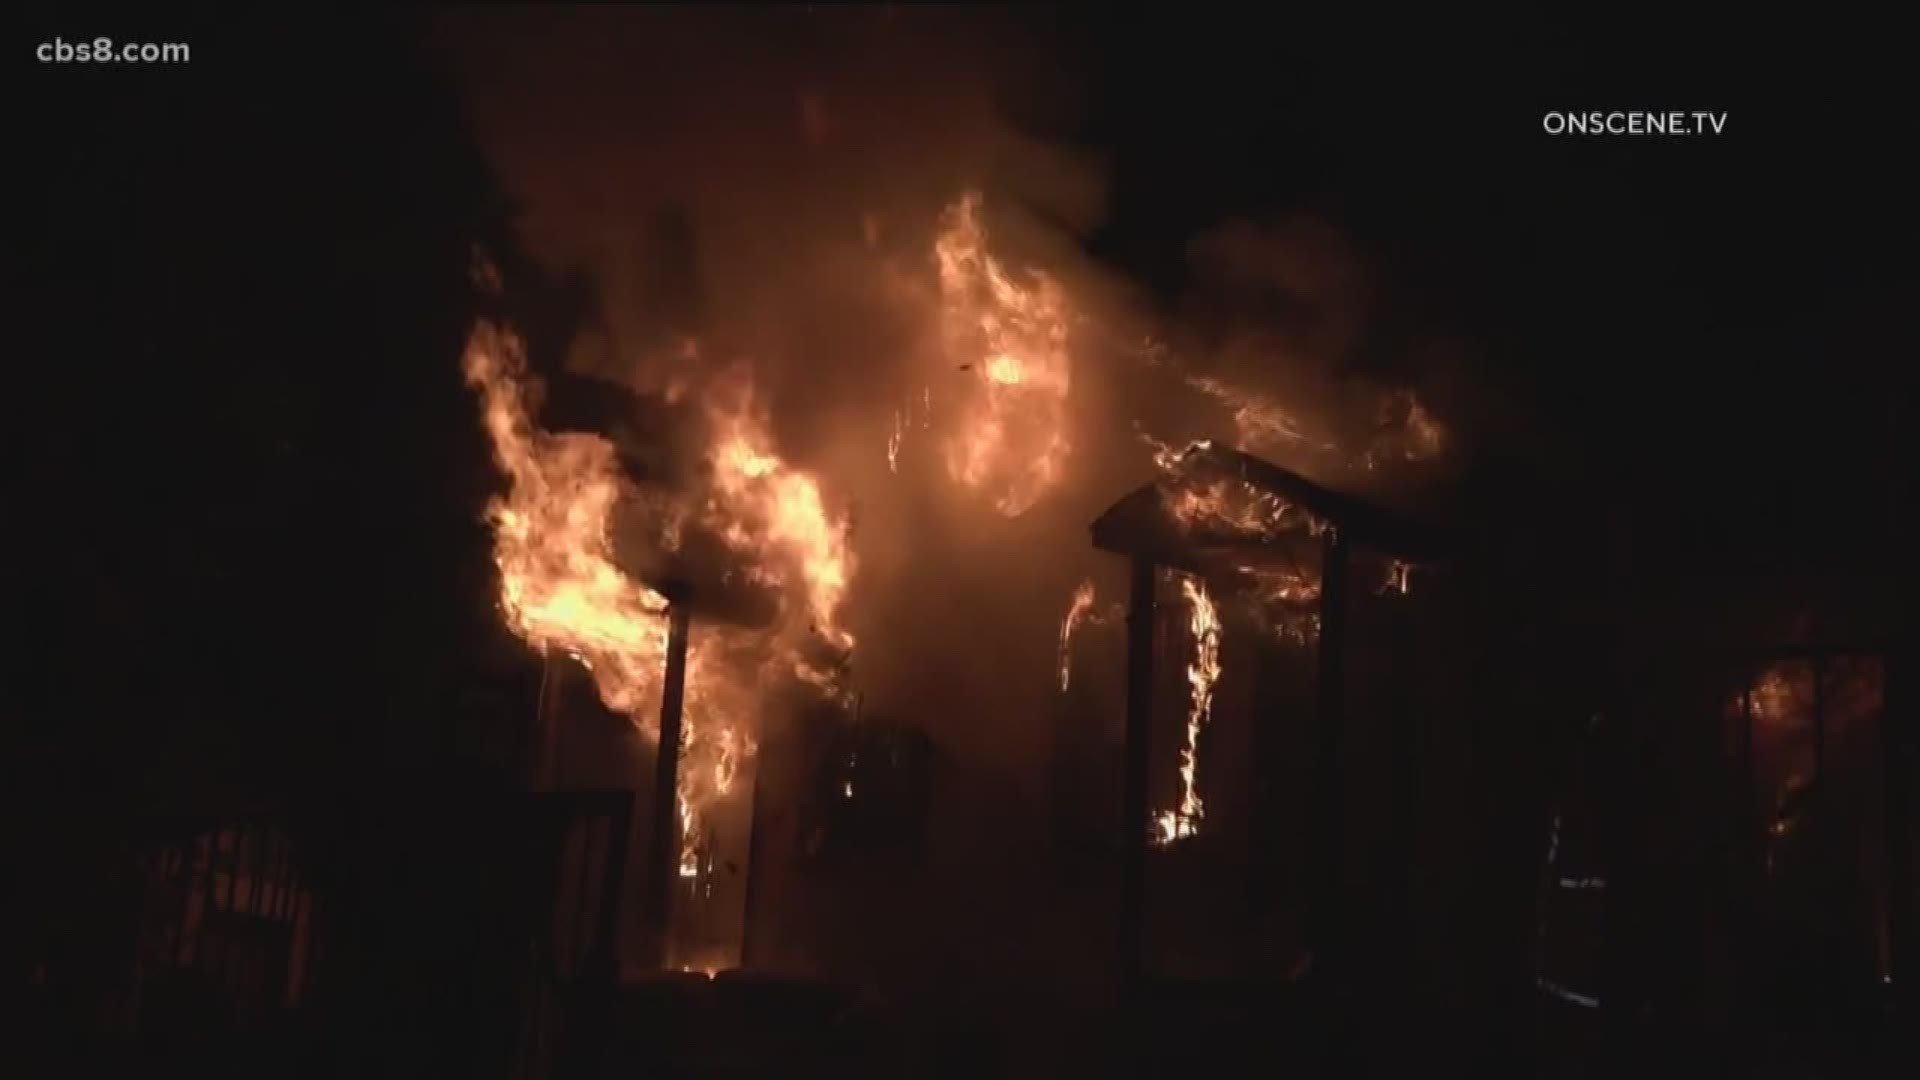 Arson investigators are looking into the cause of the deadly fire